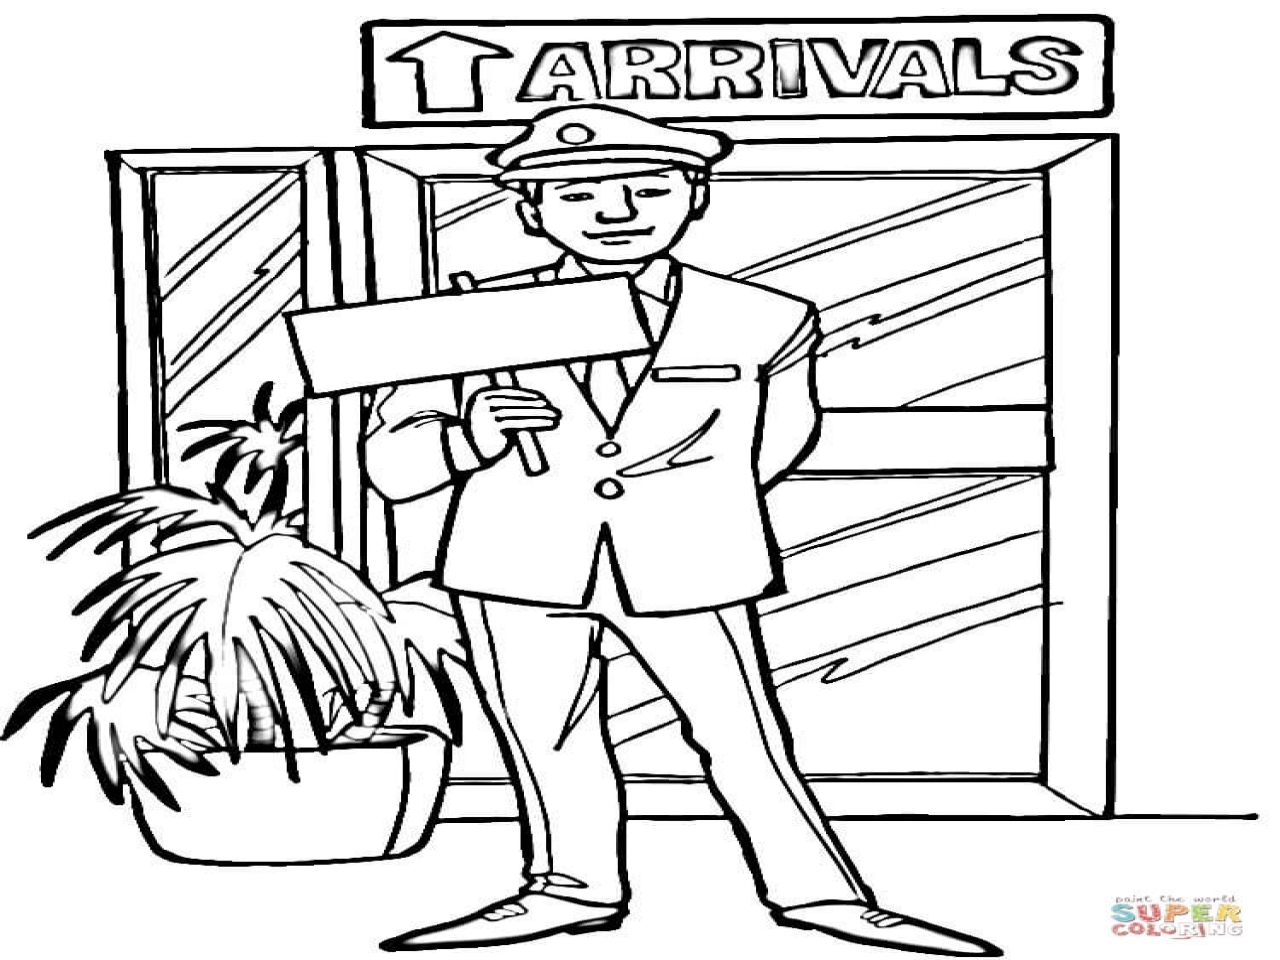 113 Cartoon Airport Coloring Pages with disney character